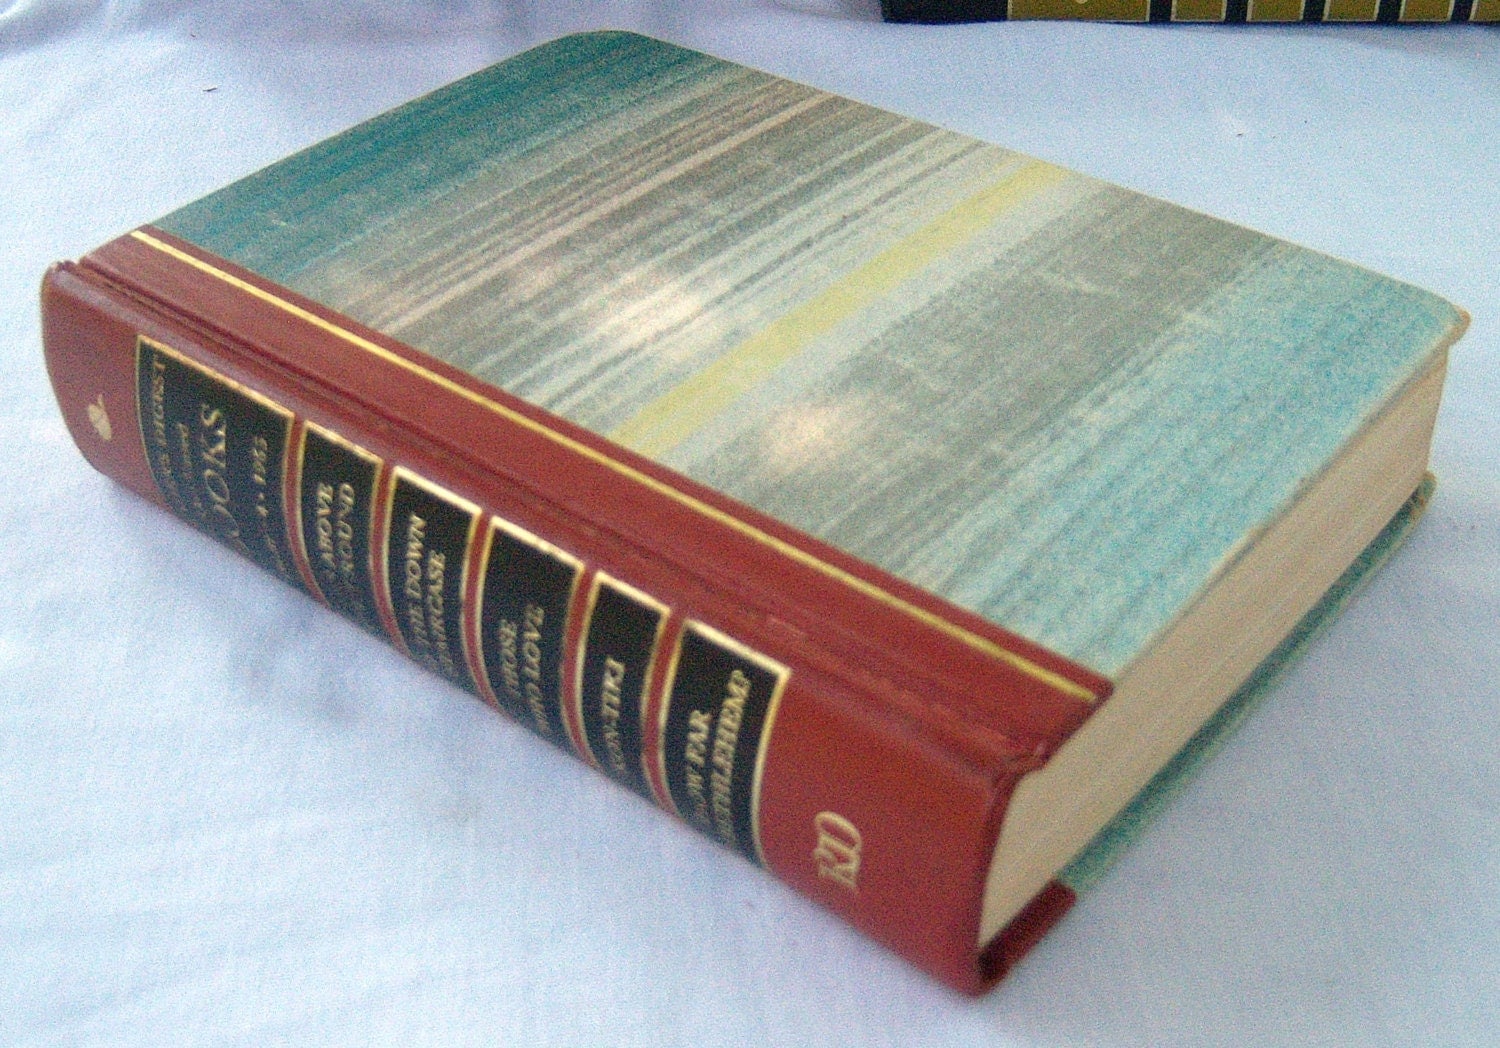 Readers Digest Condensed Books Volume 4 1965 Book Collection